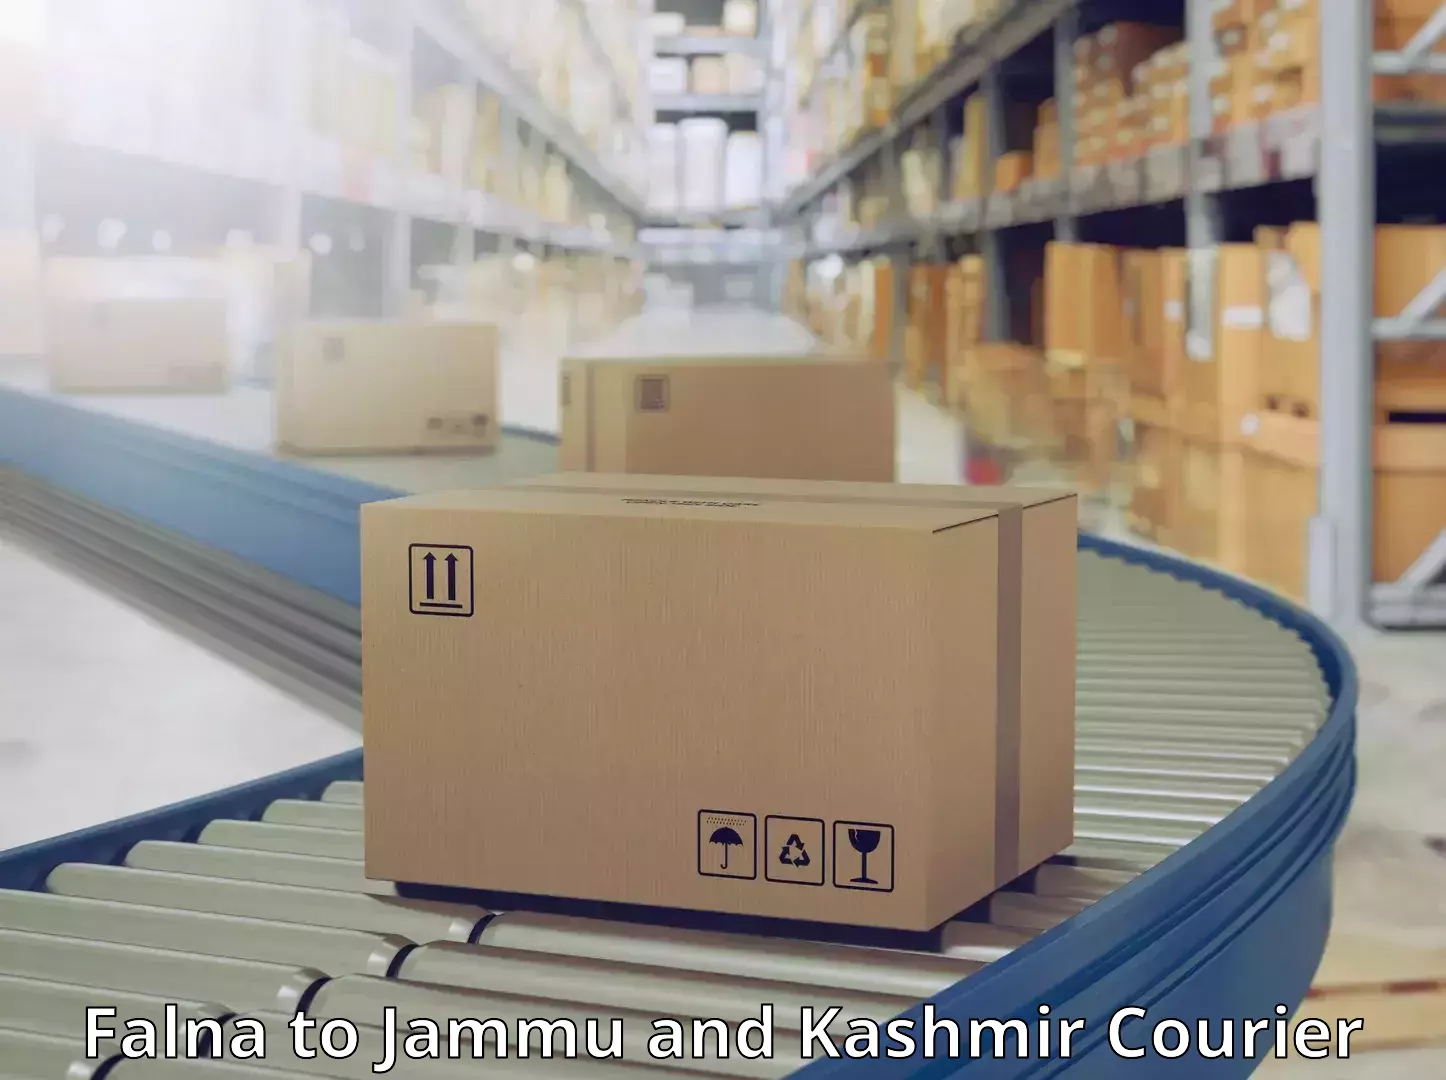 Express delivery capabilities in Falna to Pulwama